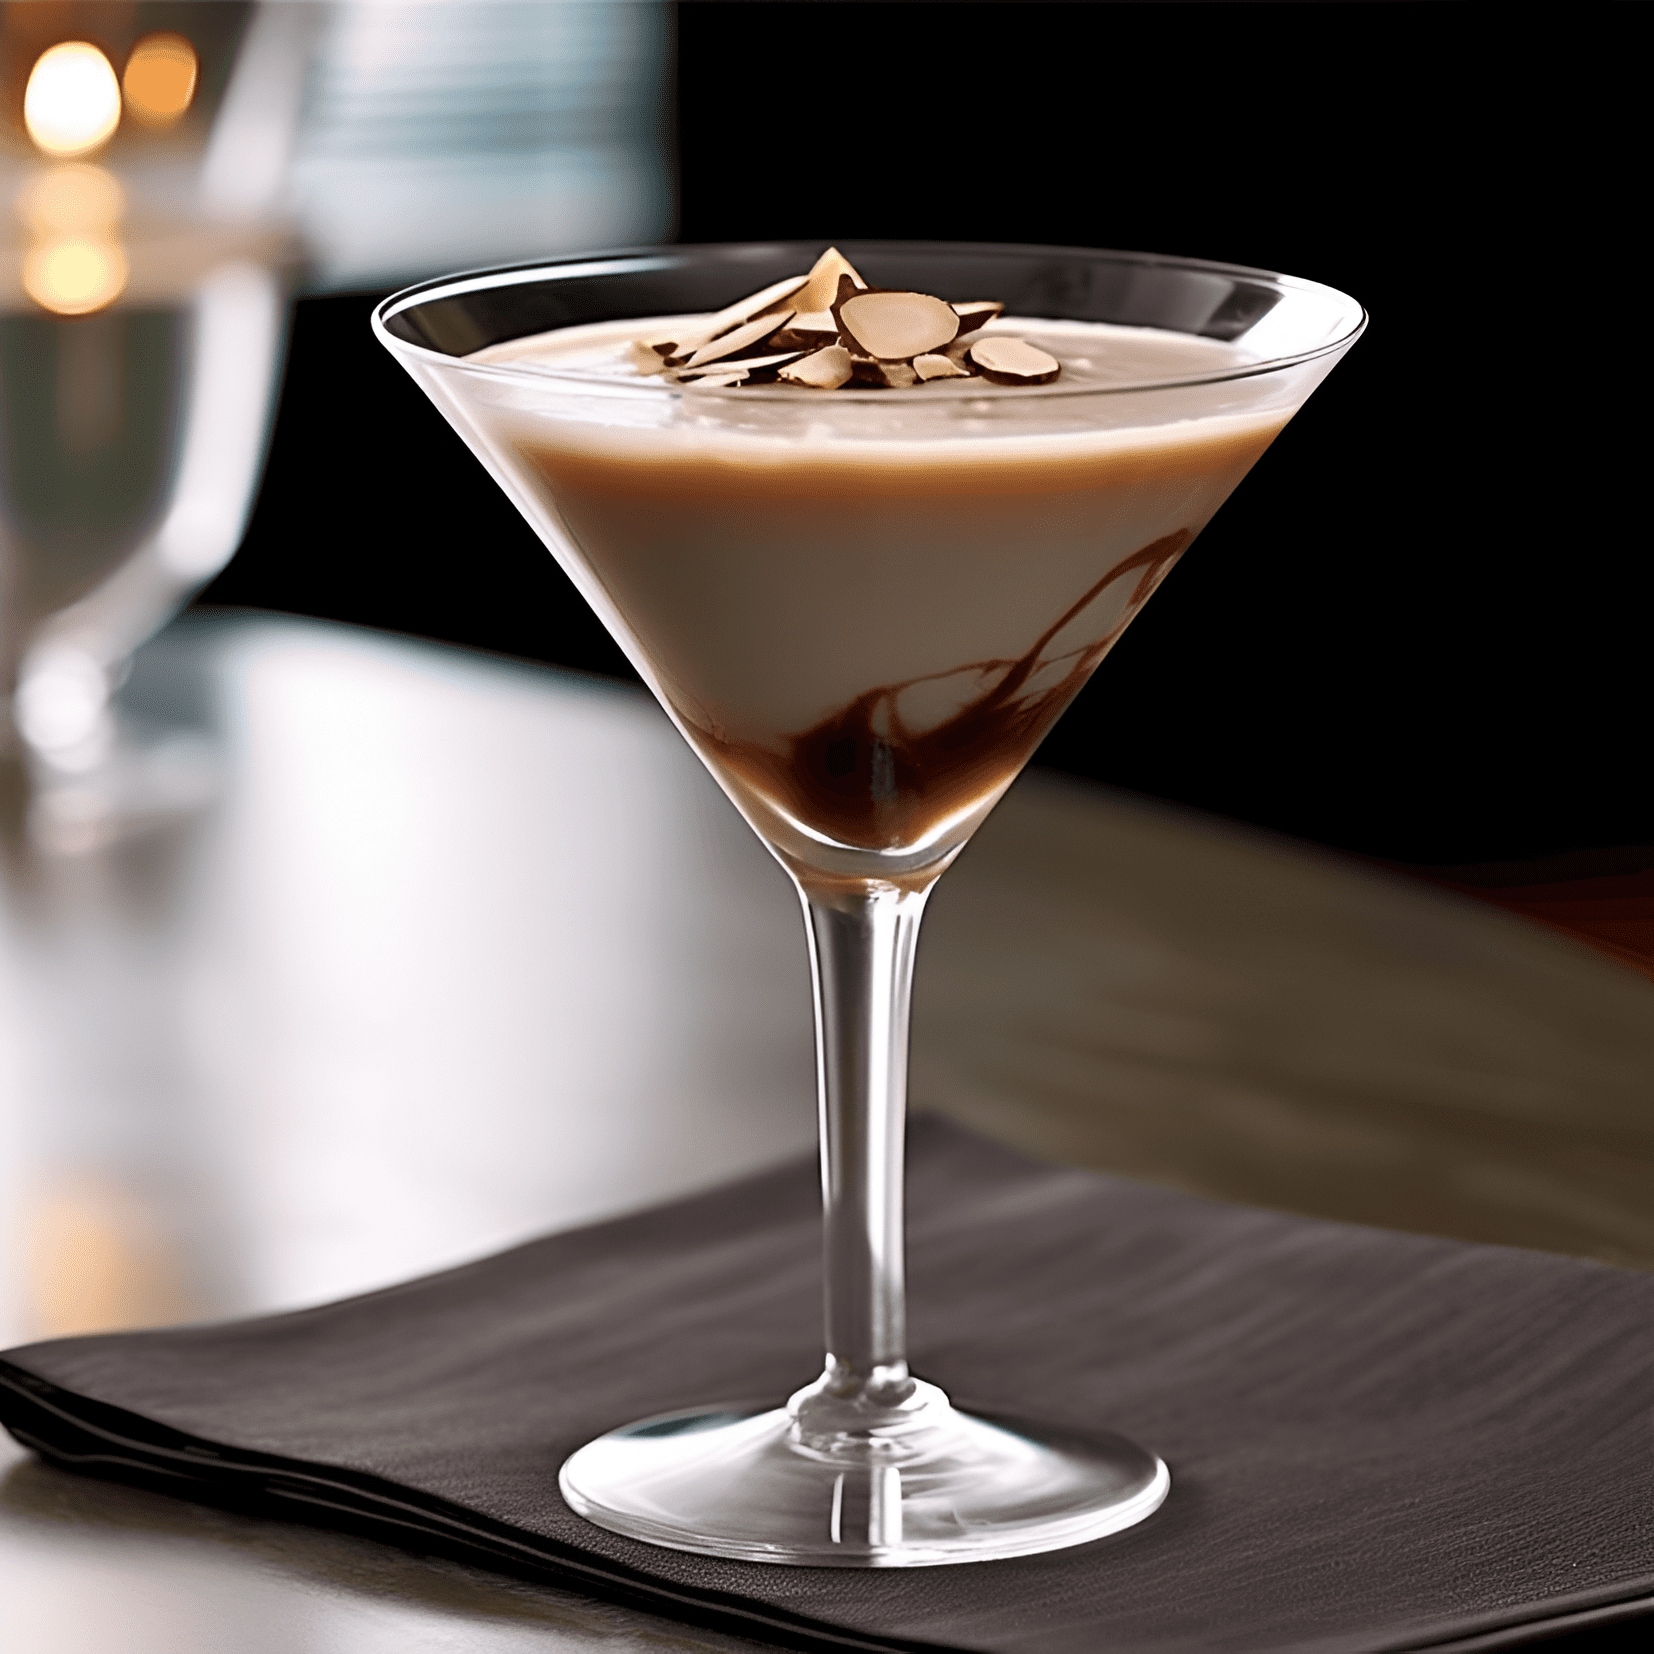 Almond Joy Cocktail Recipe - The Almond Joy cocktail is a sweet, creamy, and indulgent drink with a rich chocolate flavor, nutty almond undertones, and a hint of tropical coconut. It is a smooth and velvety cocktail with a well-balanced sweetness.